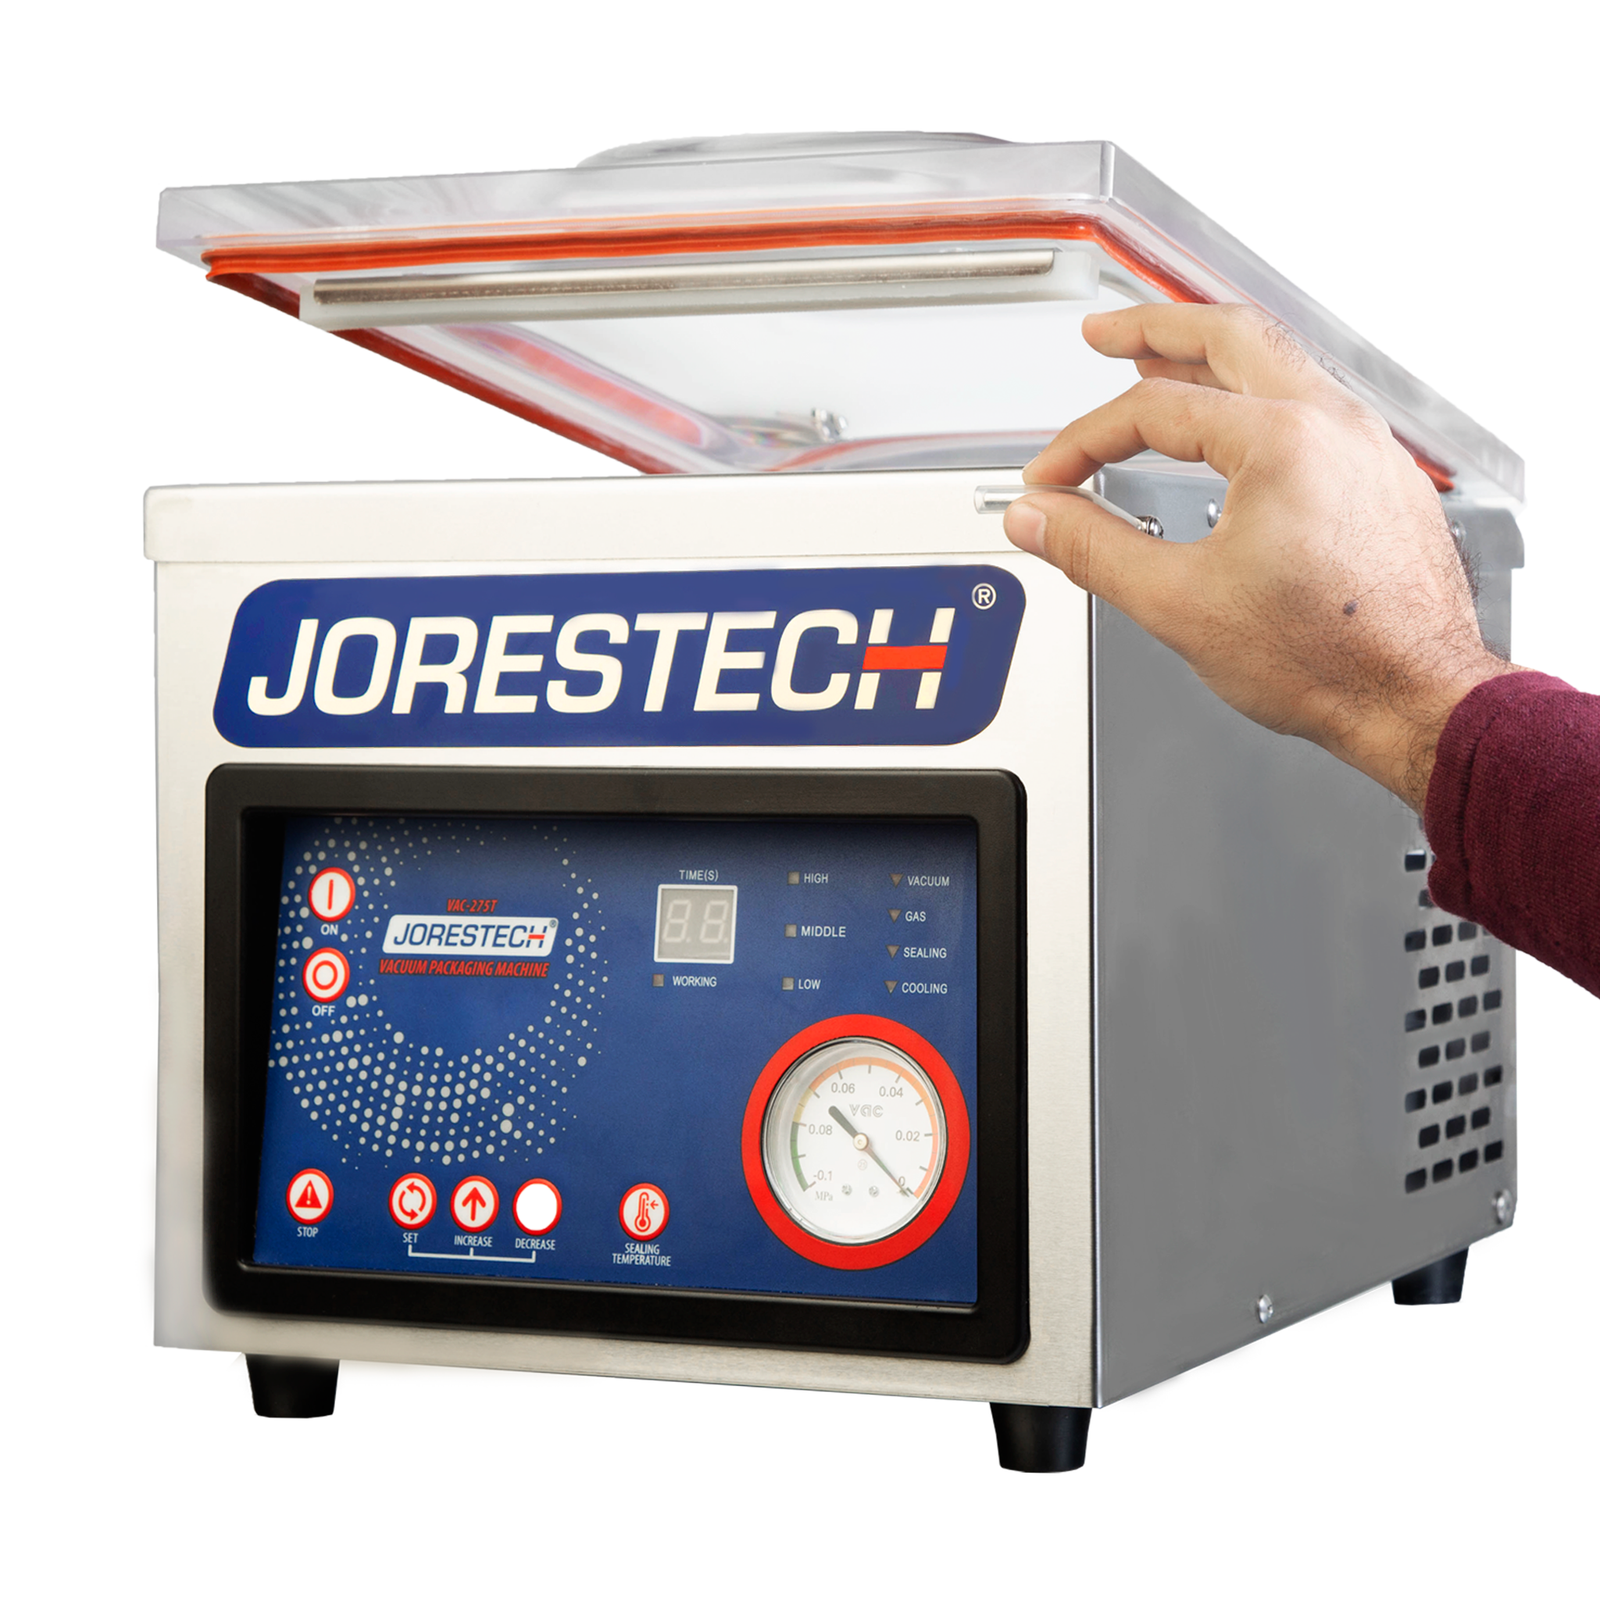 Hand of a person operating the stainless steel table top commercial single chamber vacuum sealer with one seal bar